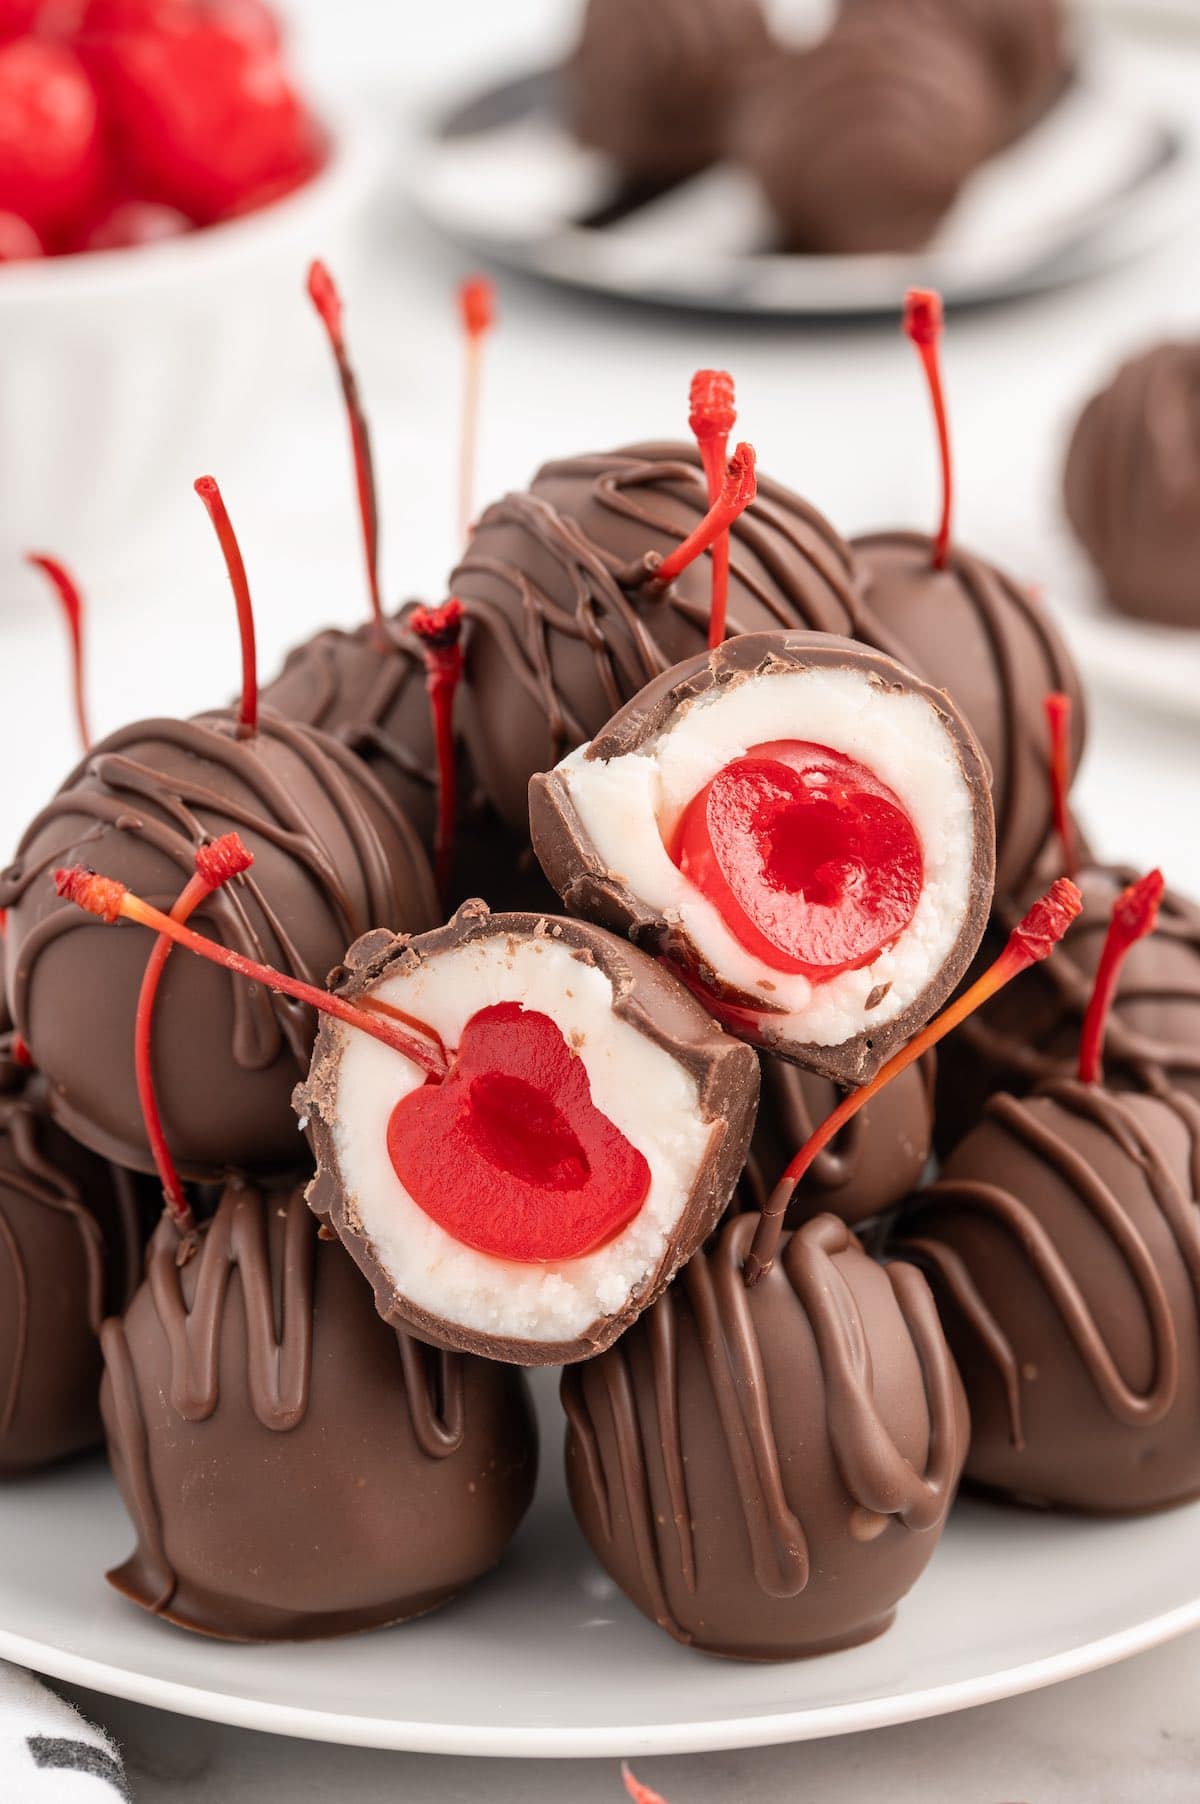 Chocolate Covered Cherries stacked on the plate.